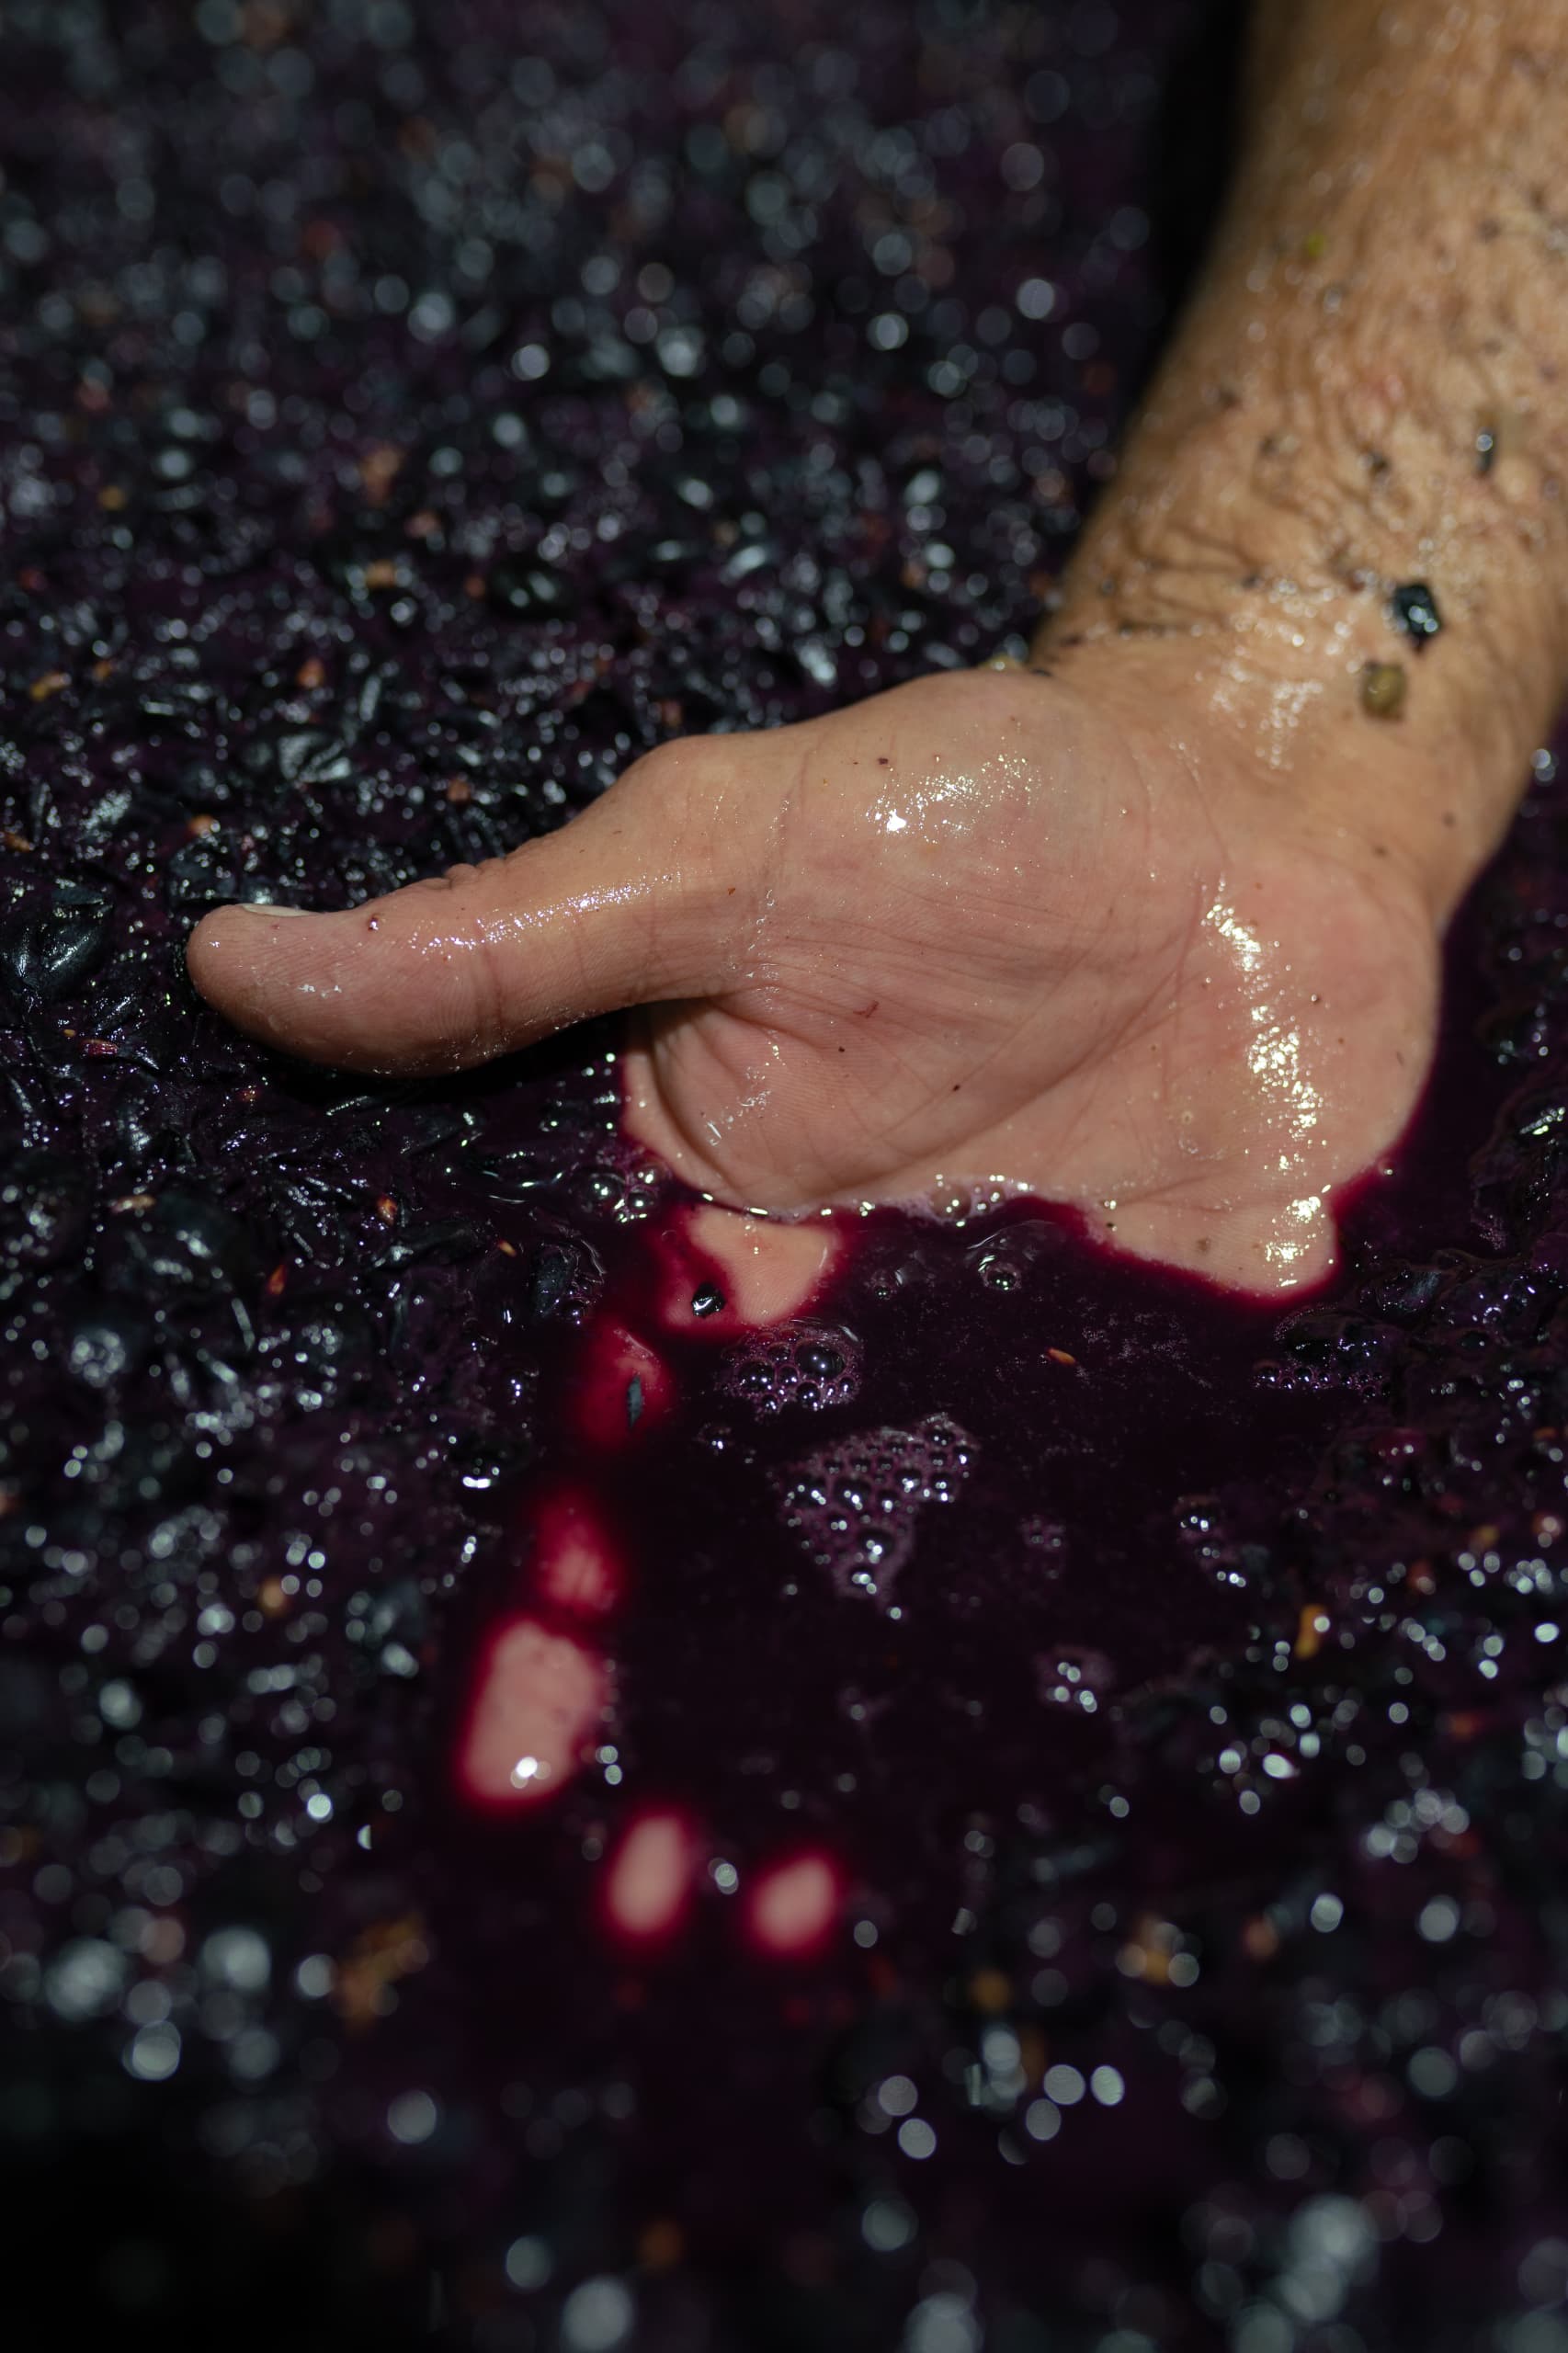 A winemaker at Tobin Wines running their hand through crushed grapes